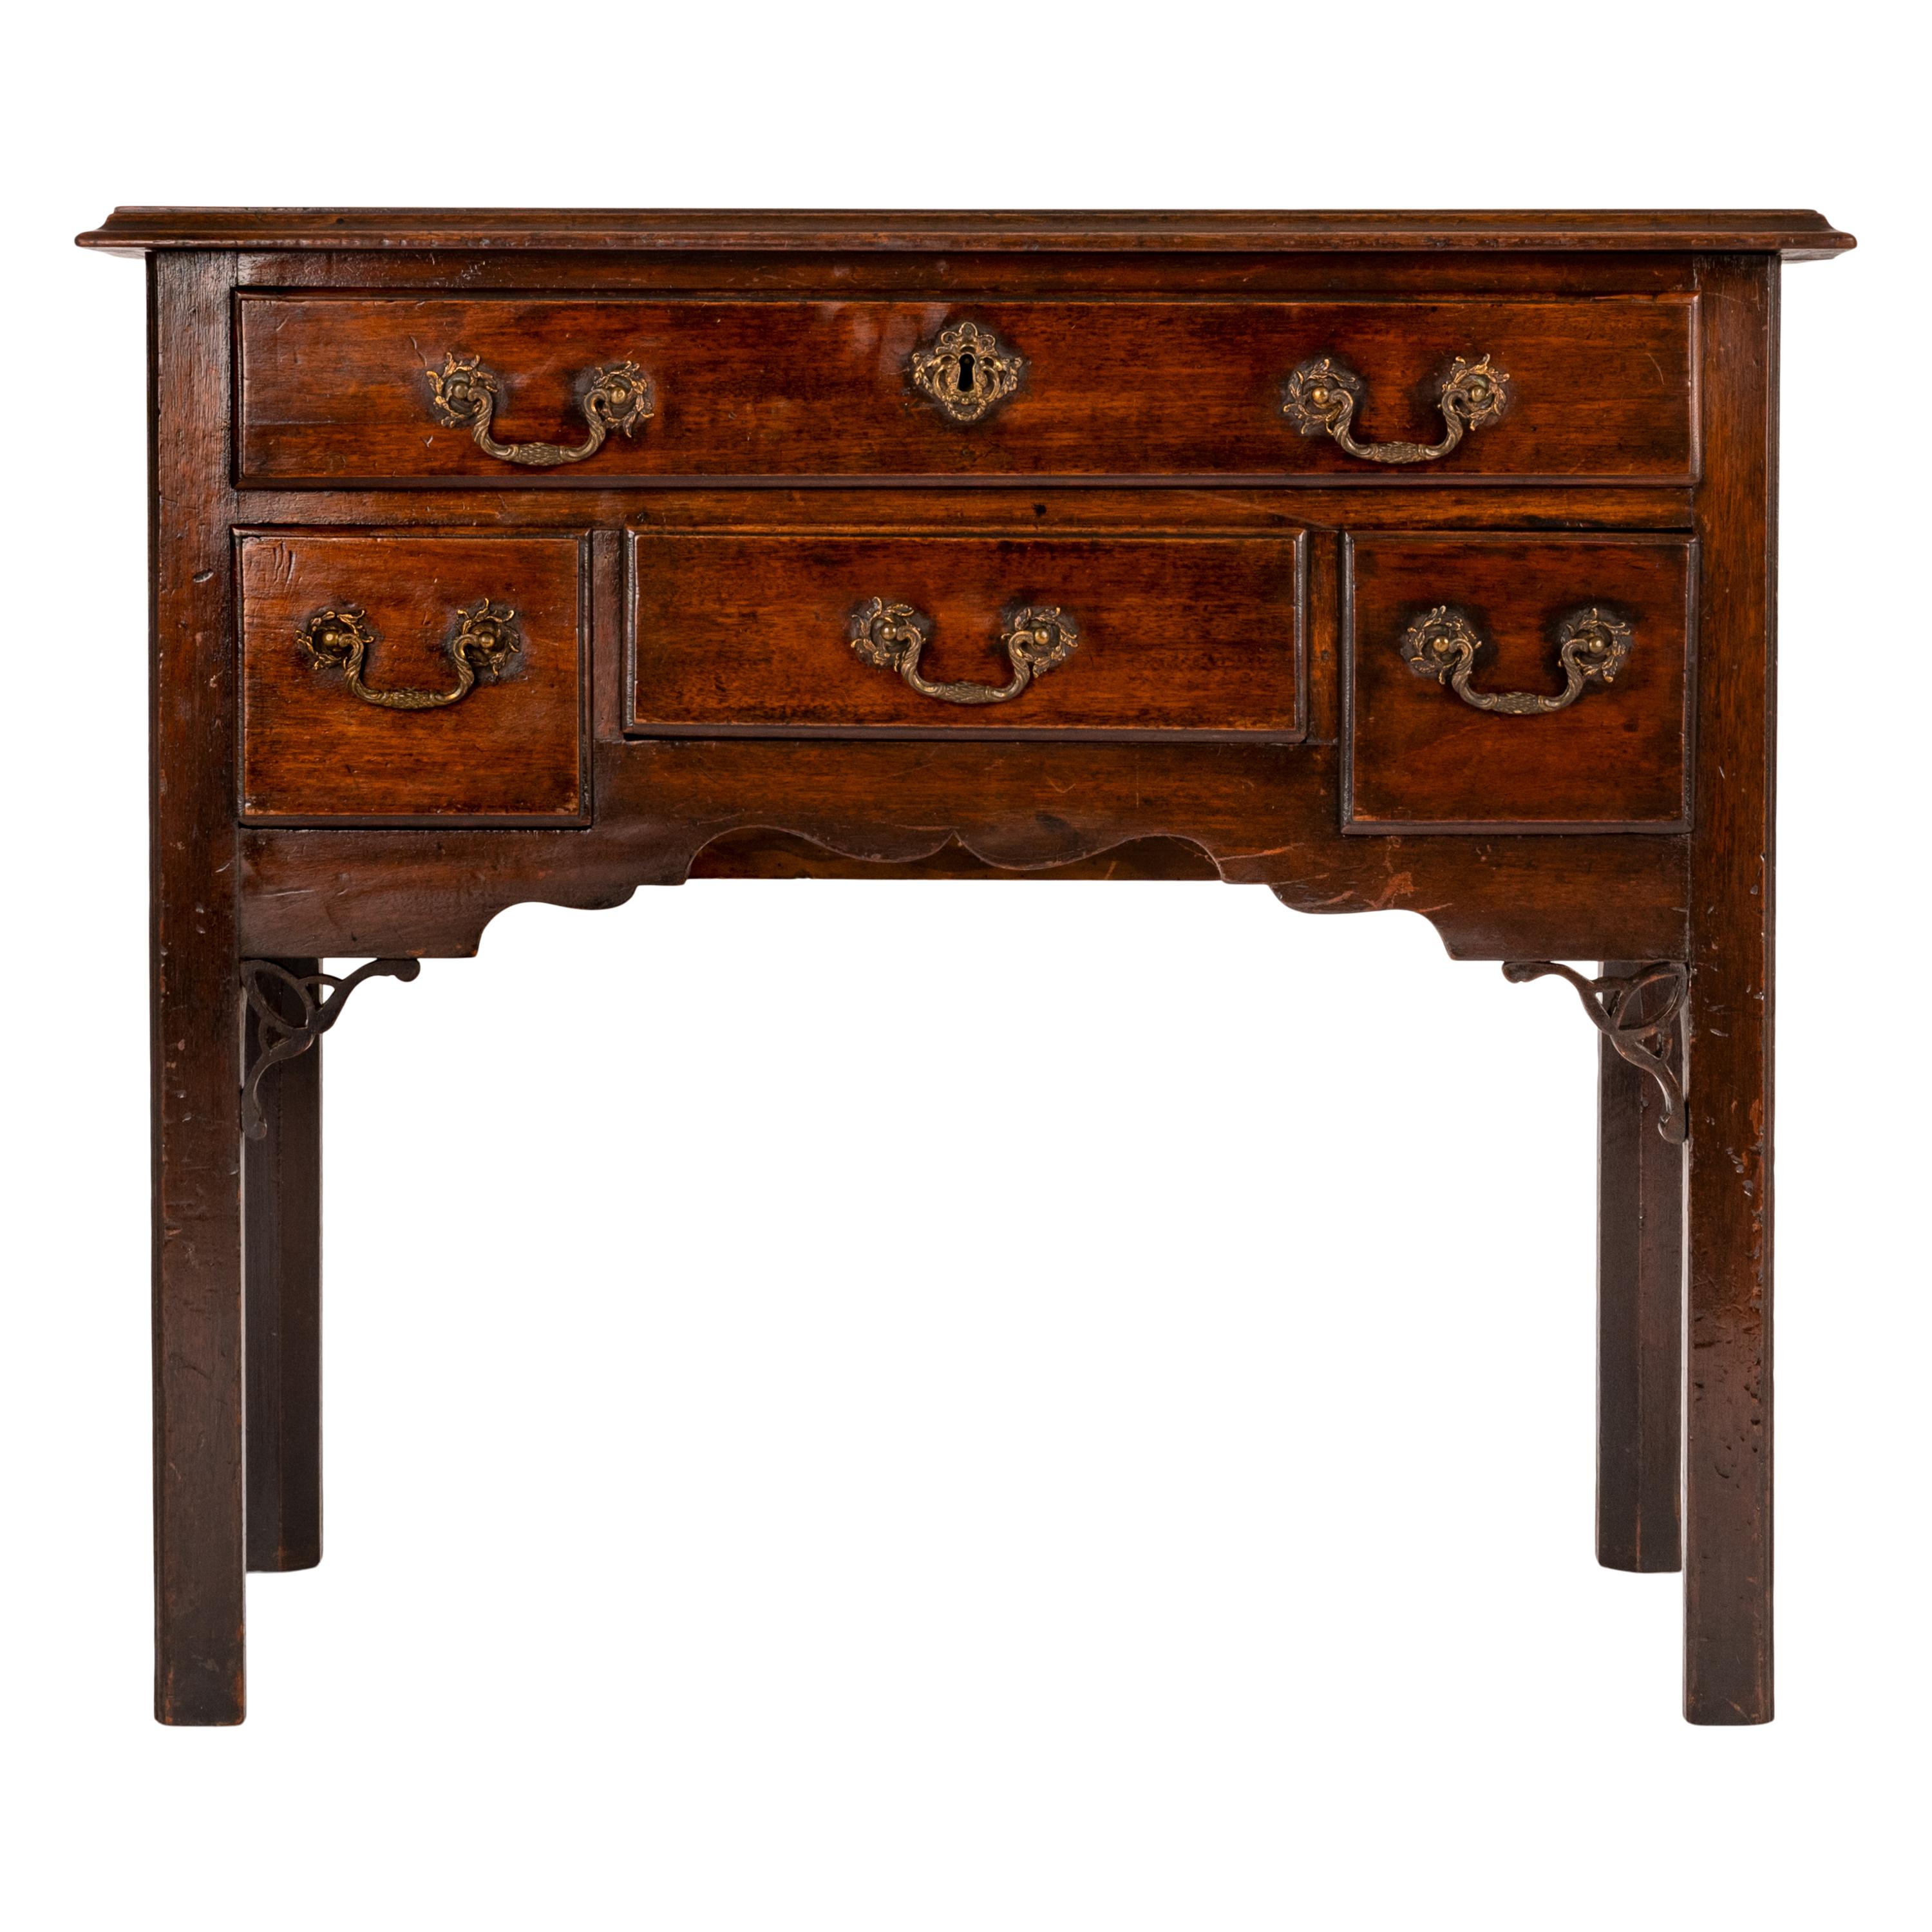 A good antique English Georgian Chippendale mahogany lowboy, circa 1750.
The molded rectangular top overhangs the case, which has one long drawer above three smaller drawers, all are thumb-molded and have the original cast brass Rococo handles and